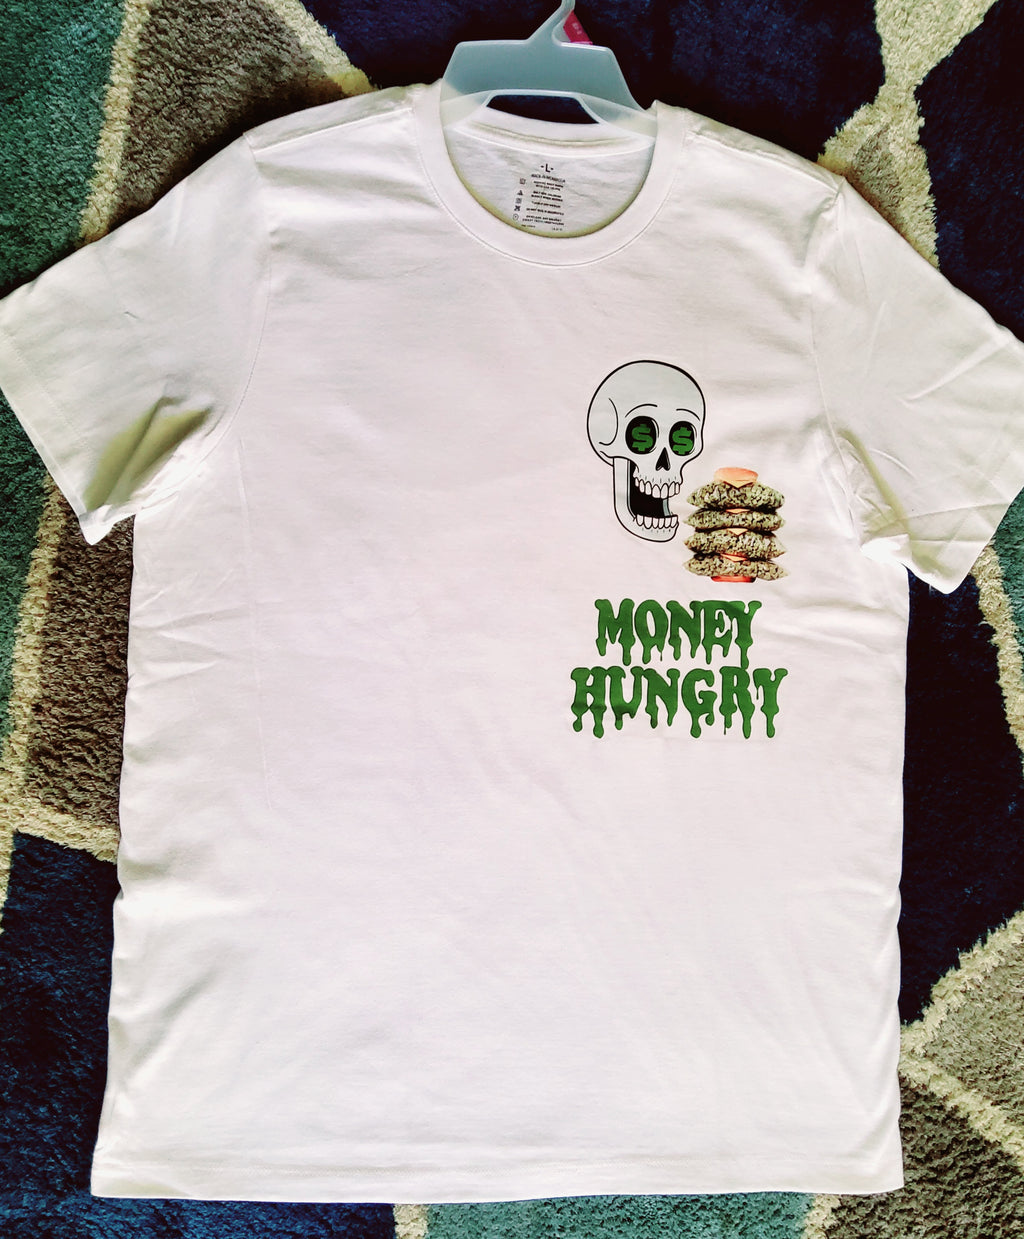 SILLY SAVAGE "MONEY HUNGRY" T SHIRT